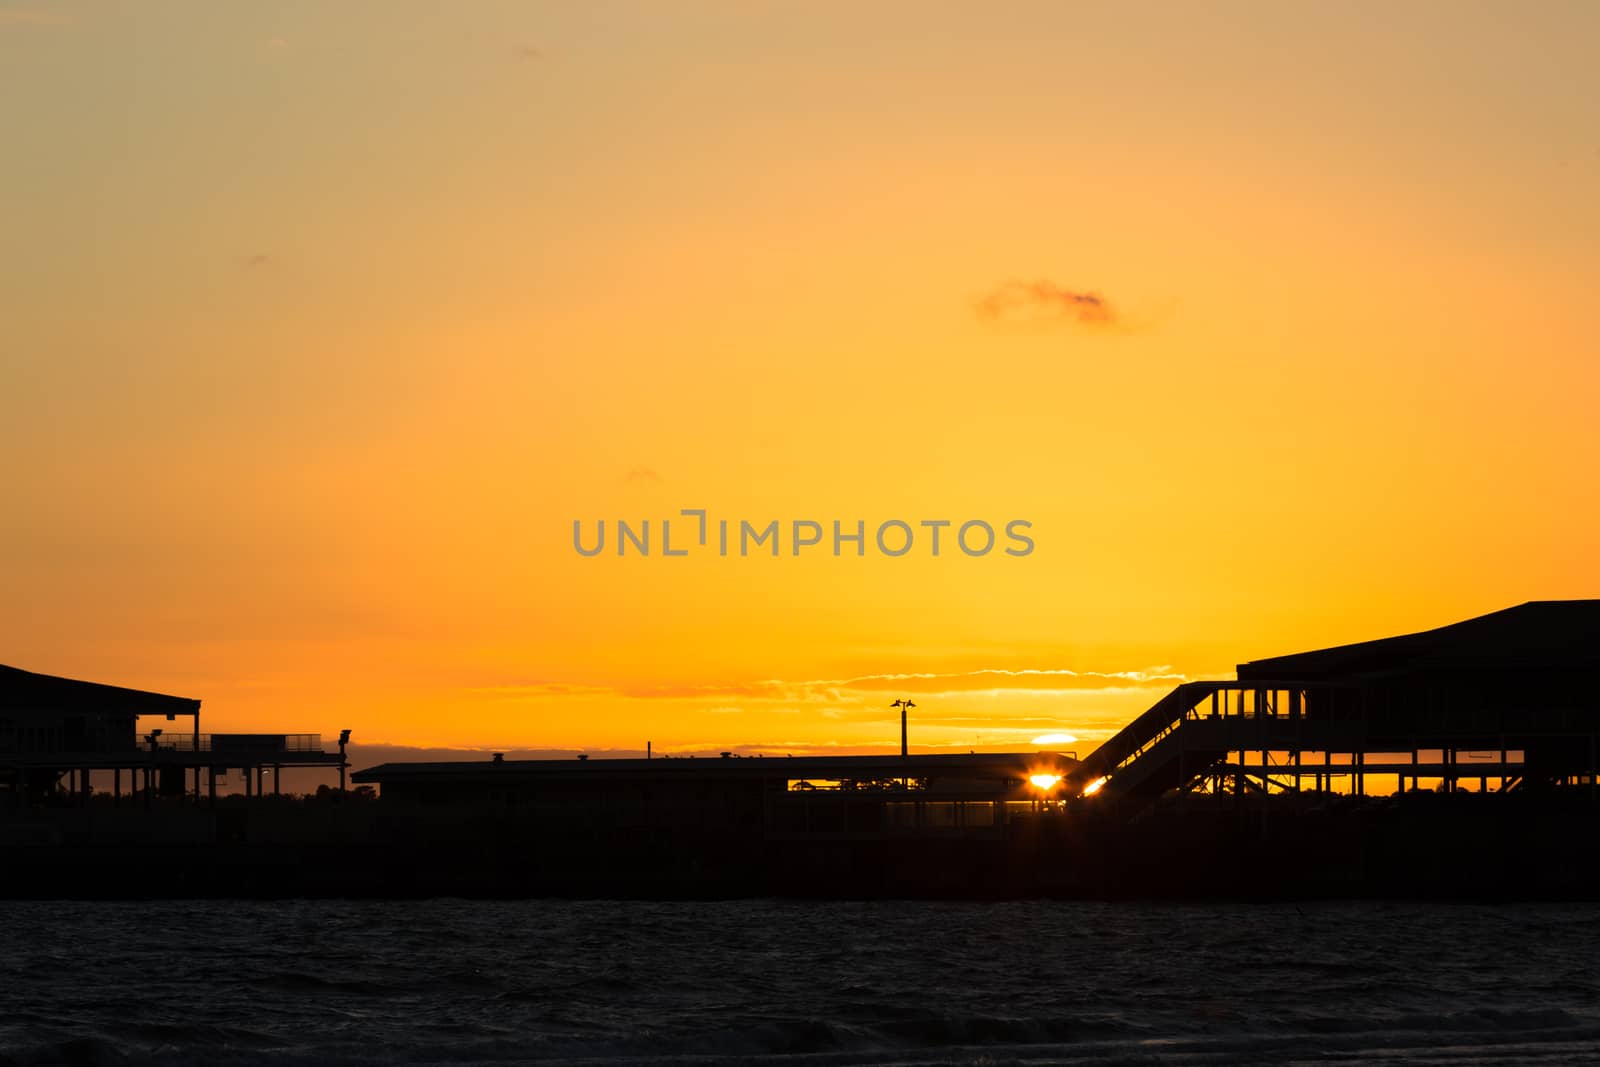 Sun setting behind Station Pier, Melbourne by davidhewison